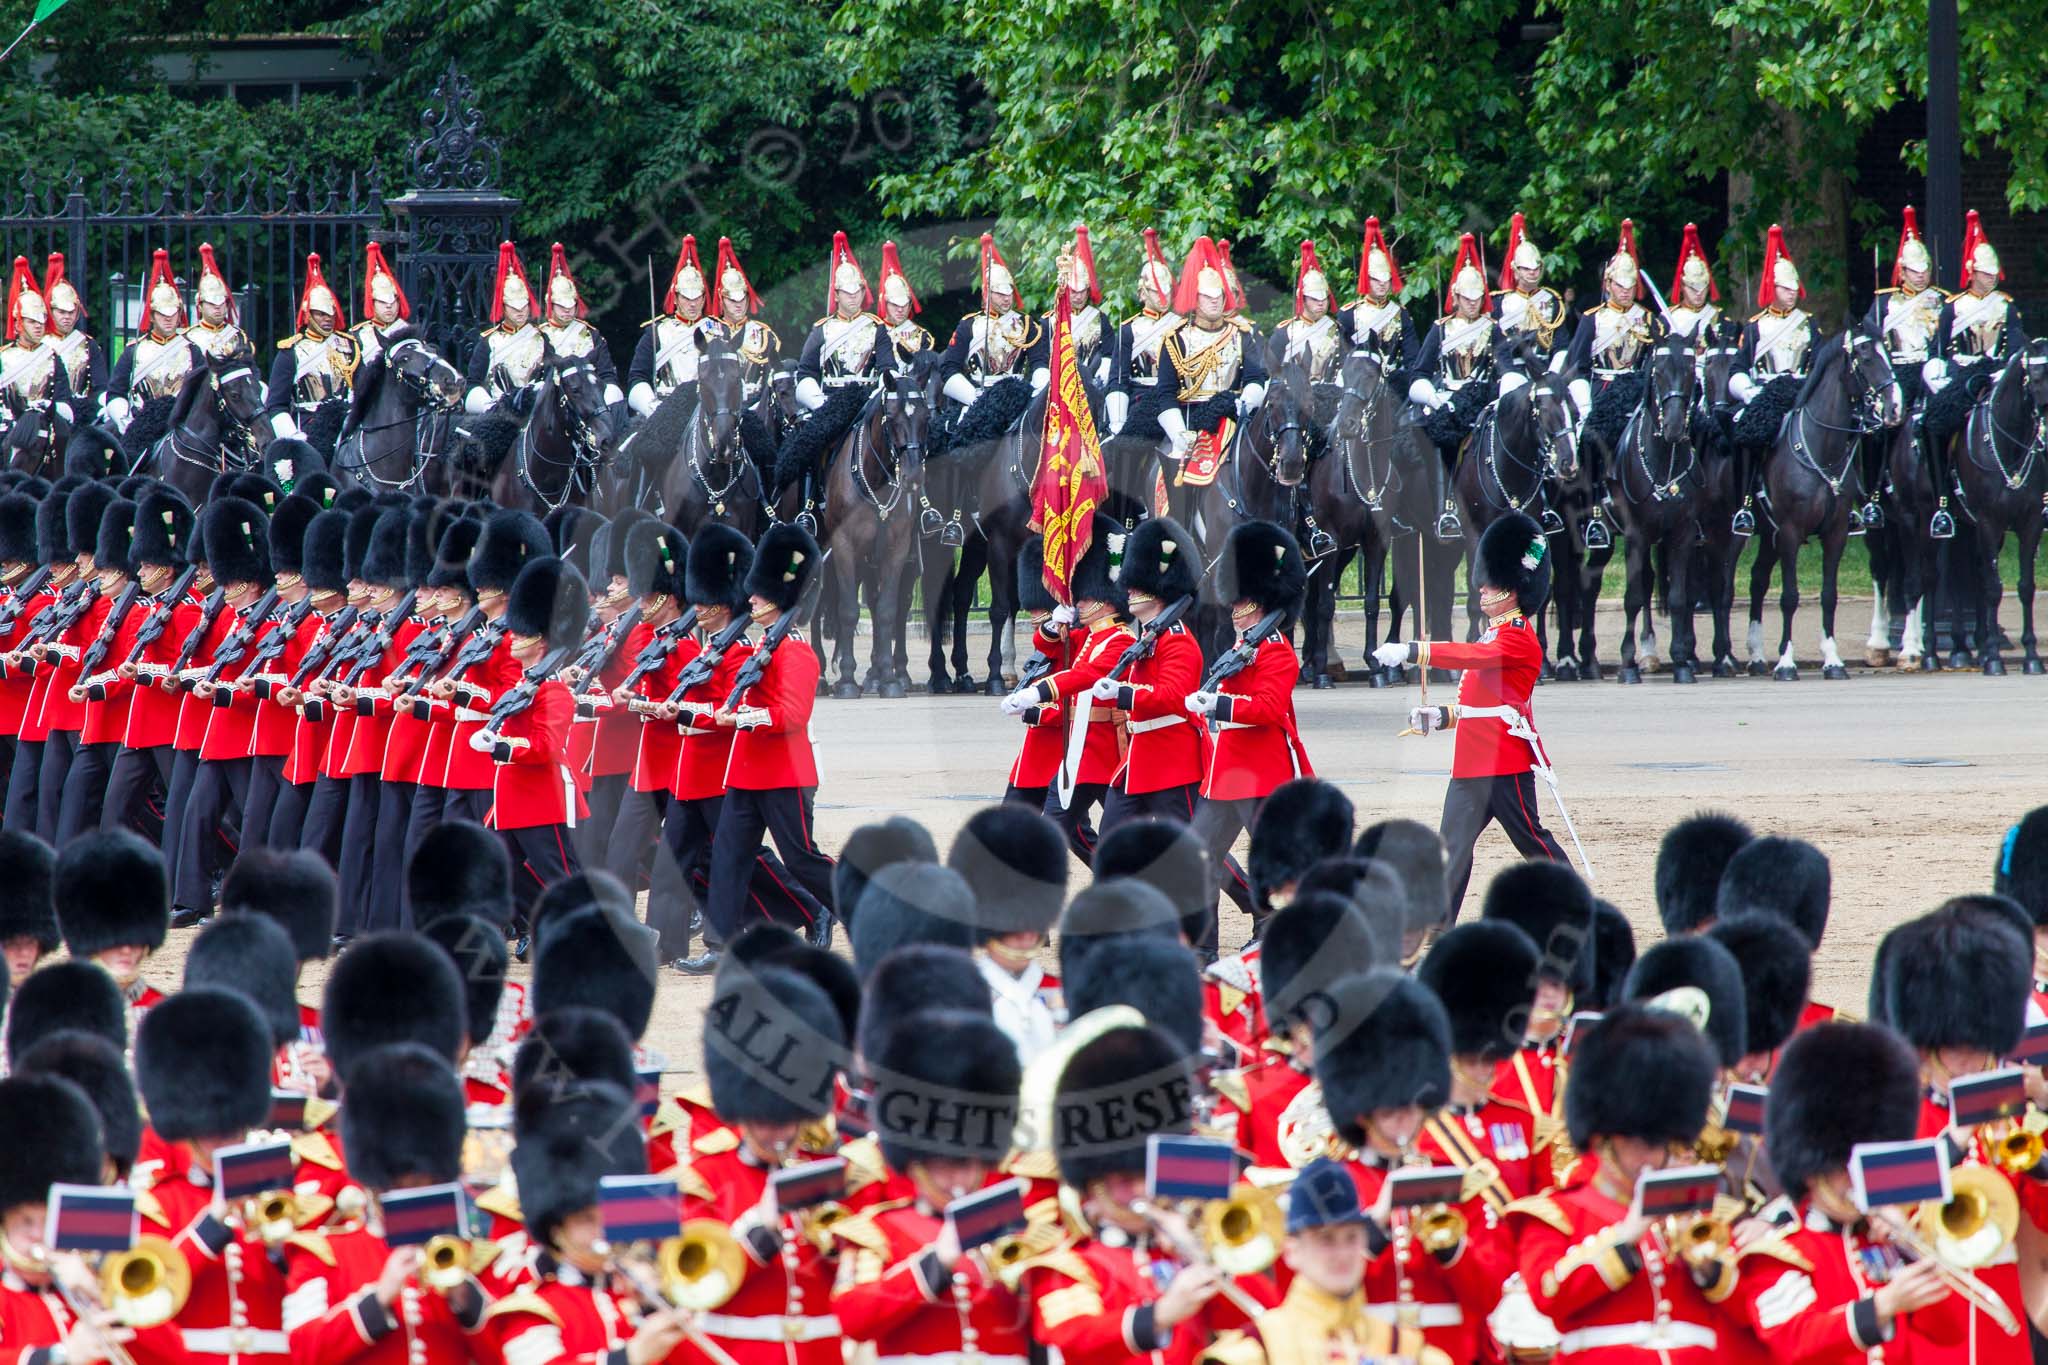 Trooping the Colour 2013: The March Past in Quick Time. The guards are marching beween the Massed Bands, in front, and the Blues and Royals behind them. The Colour Party and the Regimental Sergeant Major ar marching behind No.  Guard. Image #622, 15 June 2013 11:48 Horse Guards Parade, London, UK